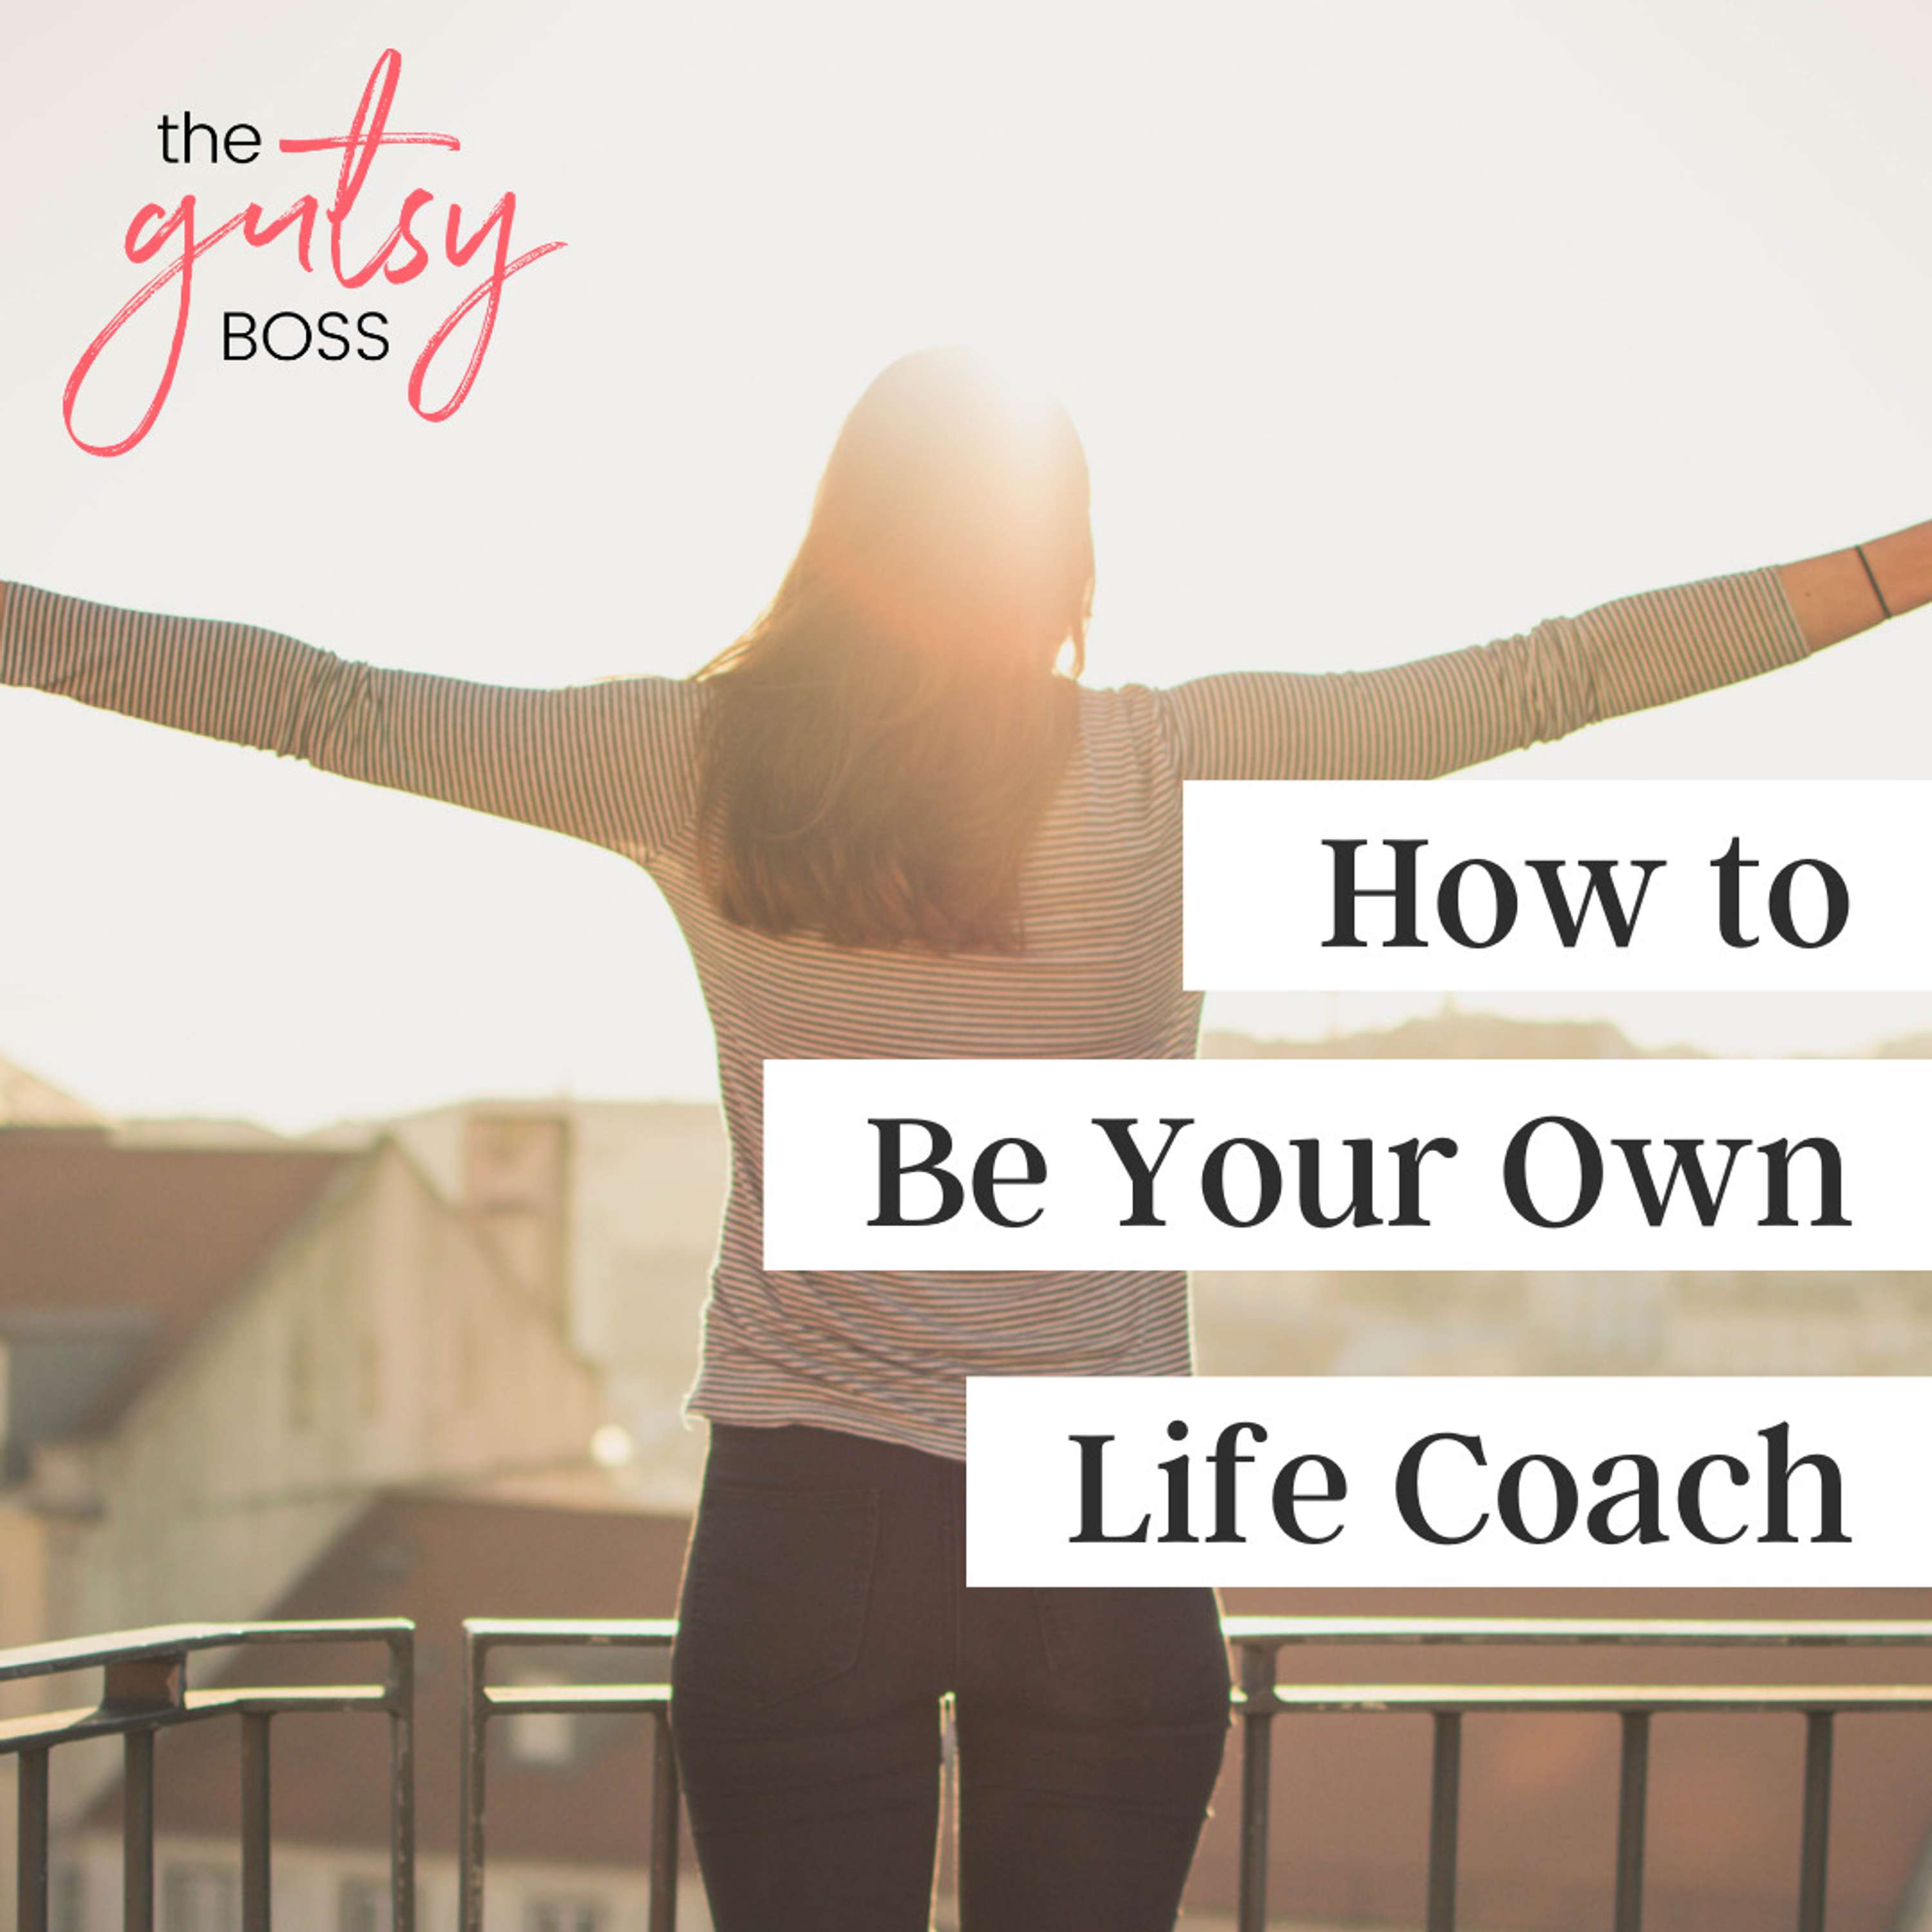 28. How to Be Your Own Life Coach